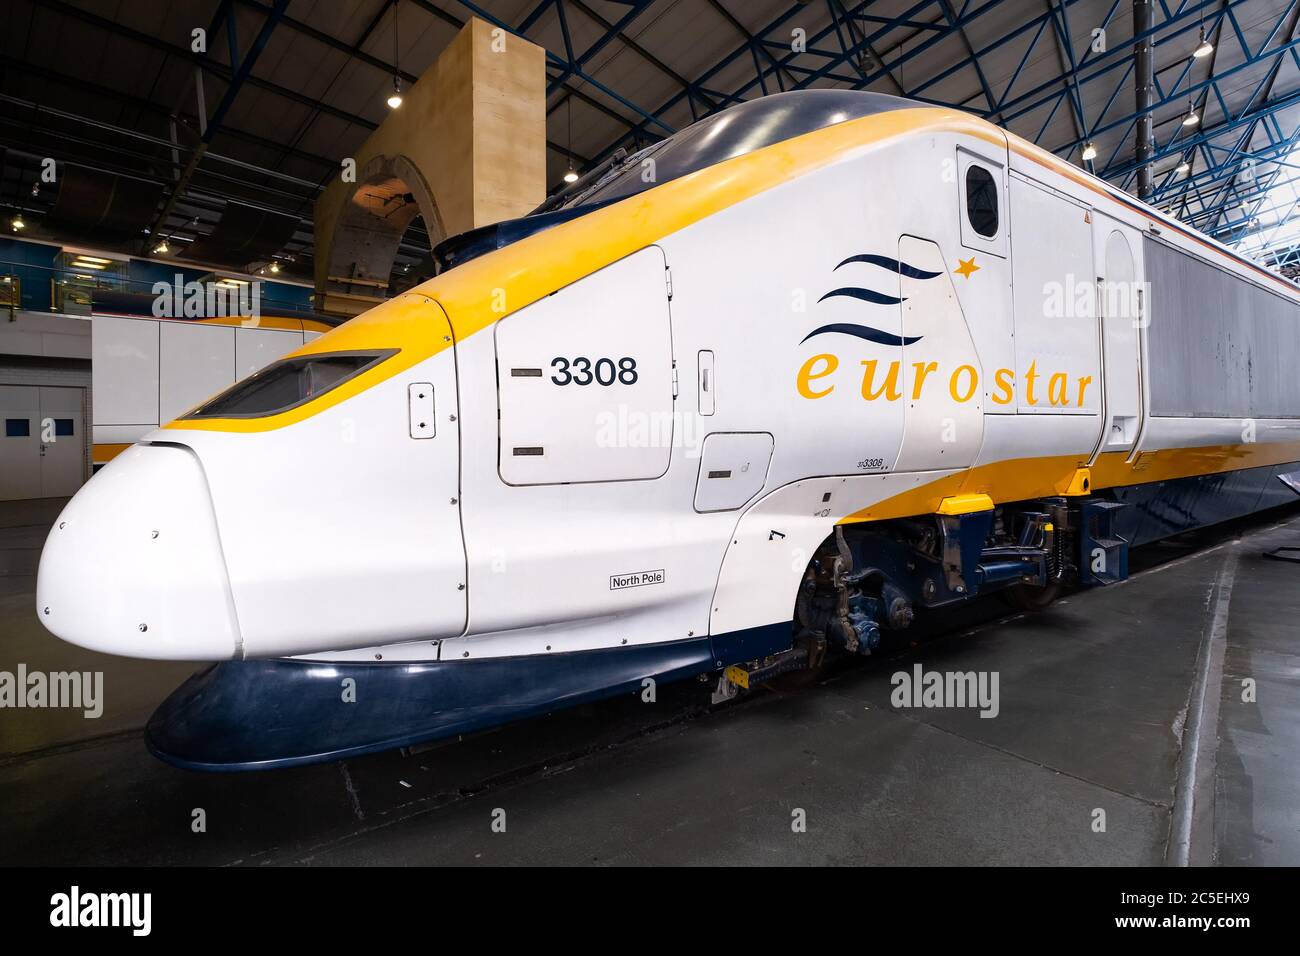 Eurostar Class 373 trains at the National Railway Museum in York Stock Photo